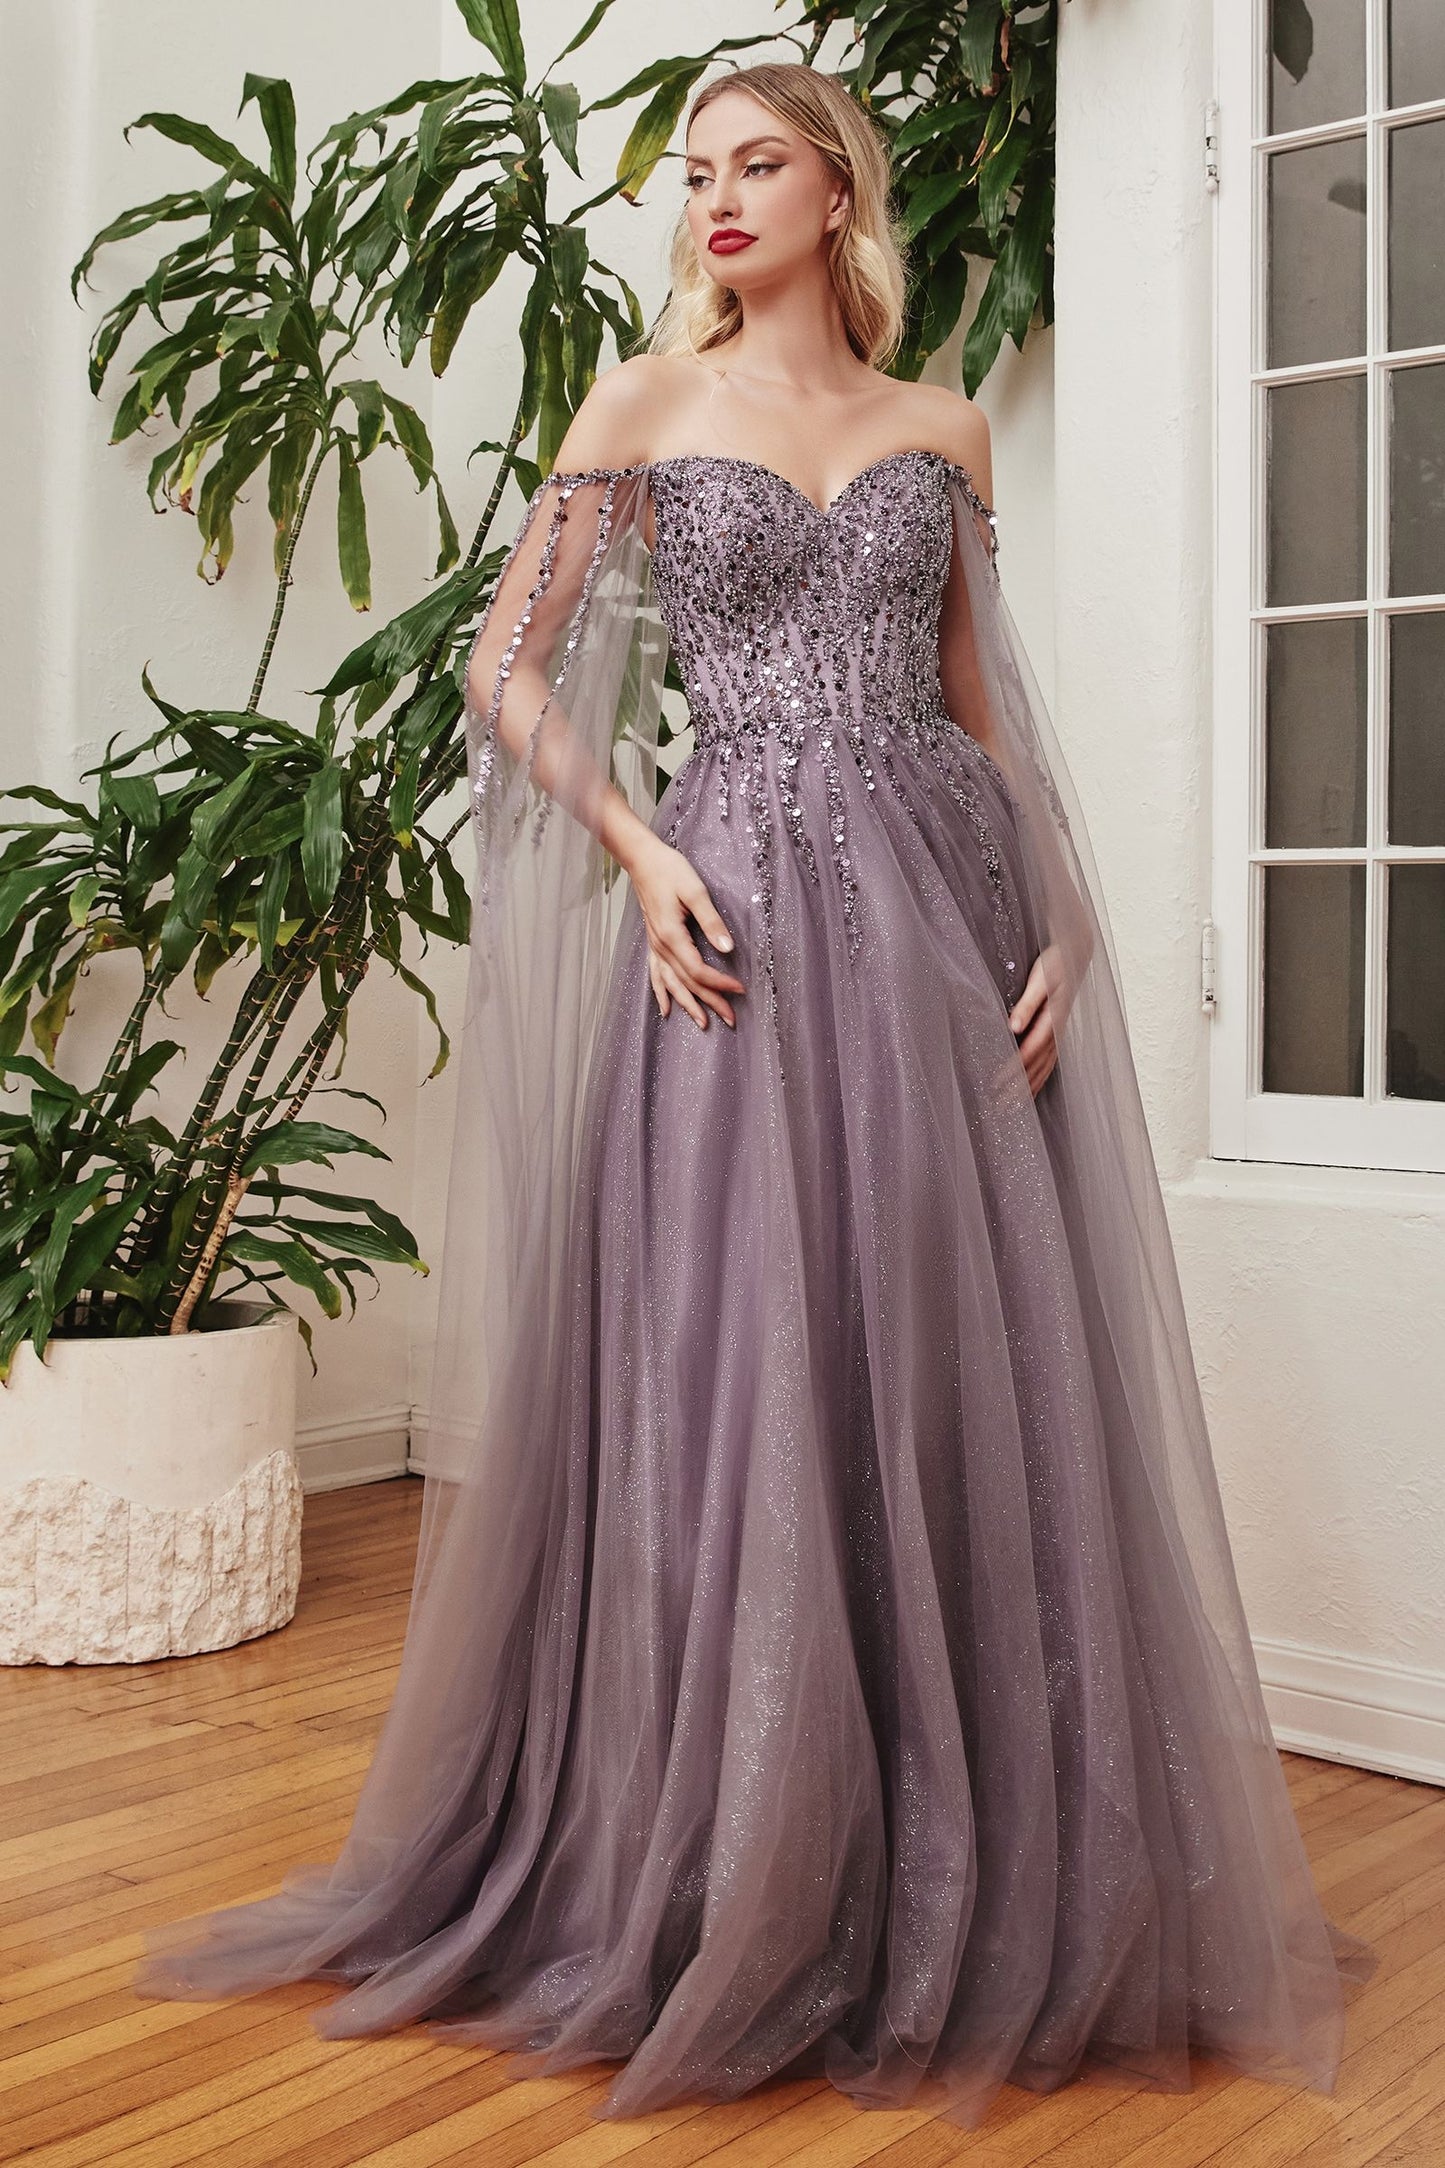 Mother of the bride sophisticated black evening dress featuring a beaded bodice and a floor-length skirt.